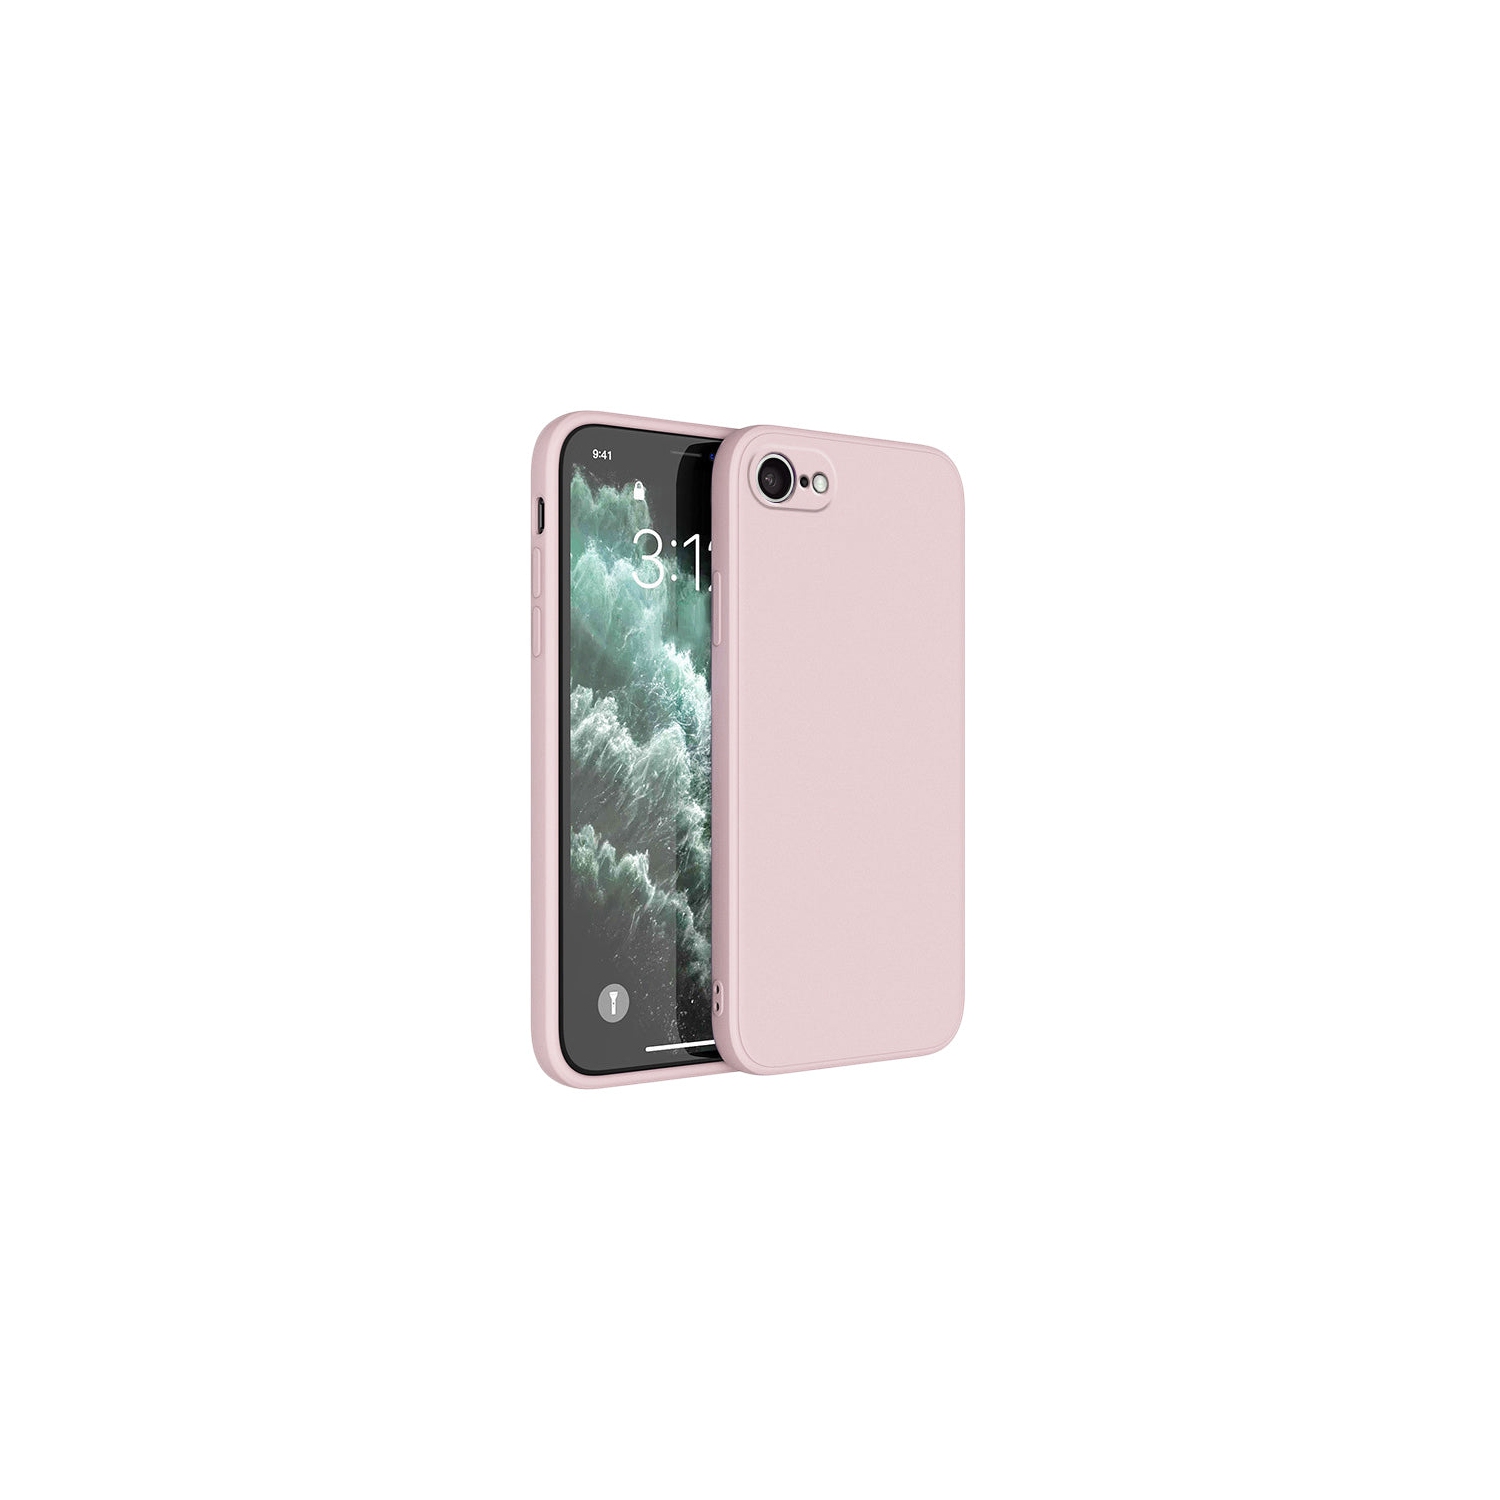 PANDACO Soft Shell Matte Pink Case for iPhone 6 Plus or iPhone 6S Plus